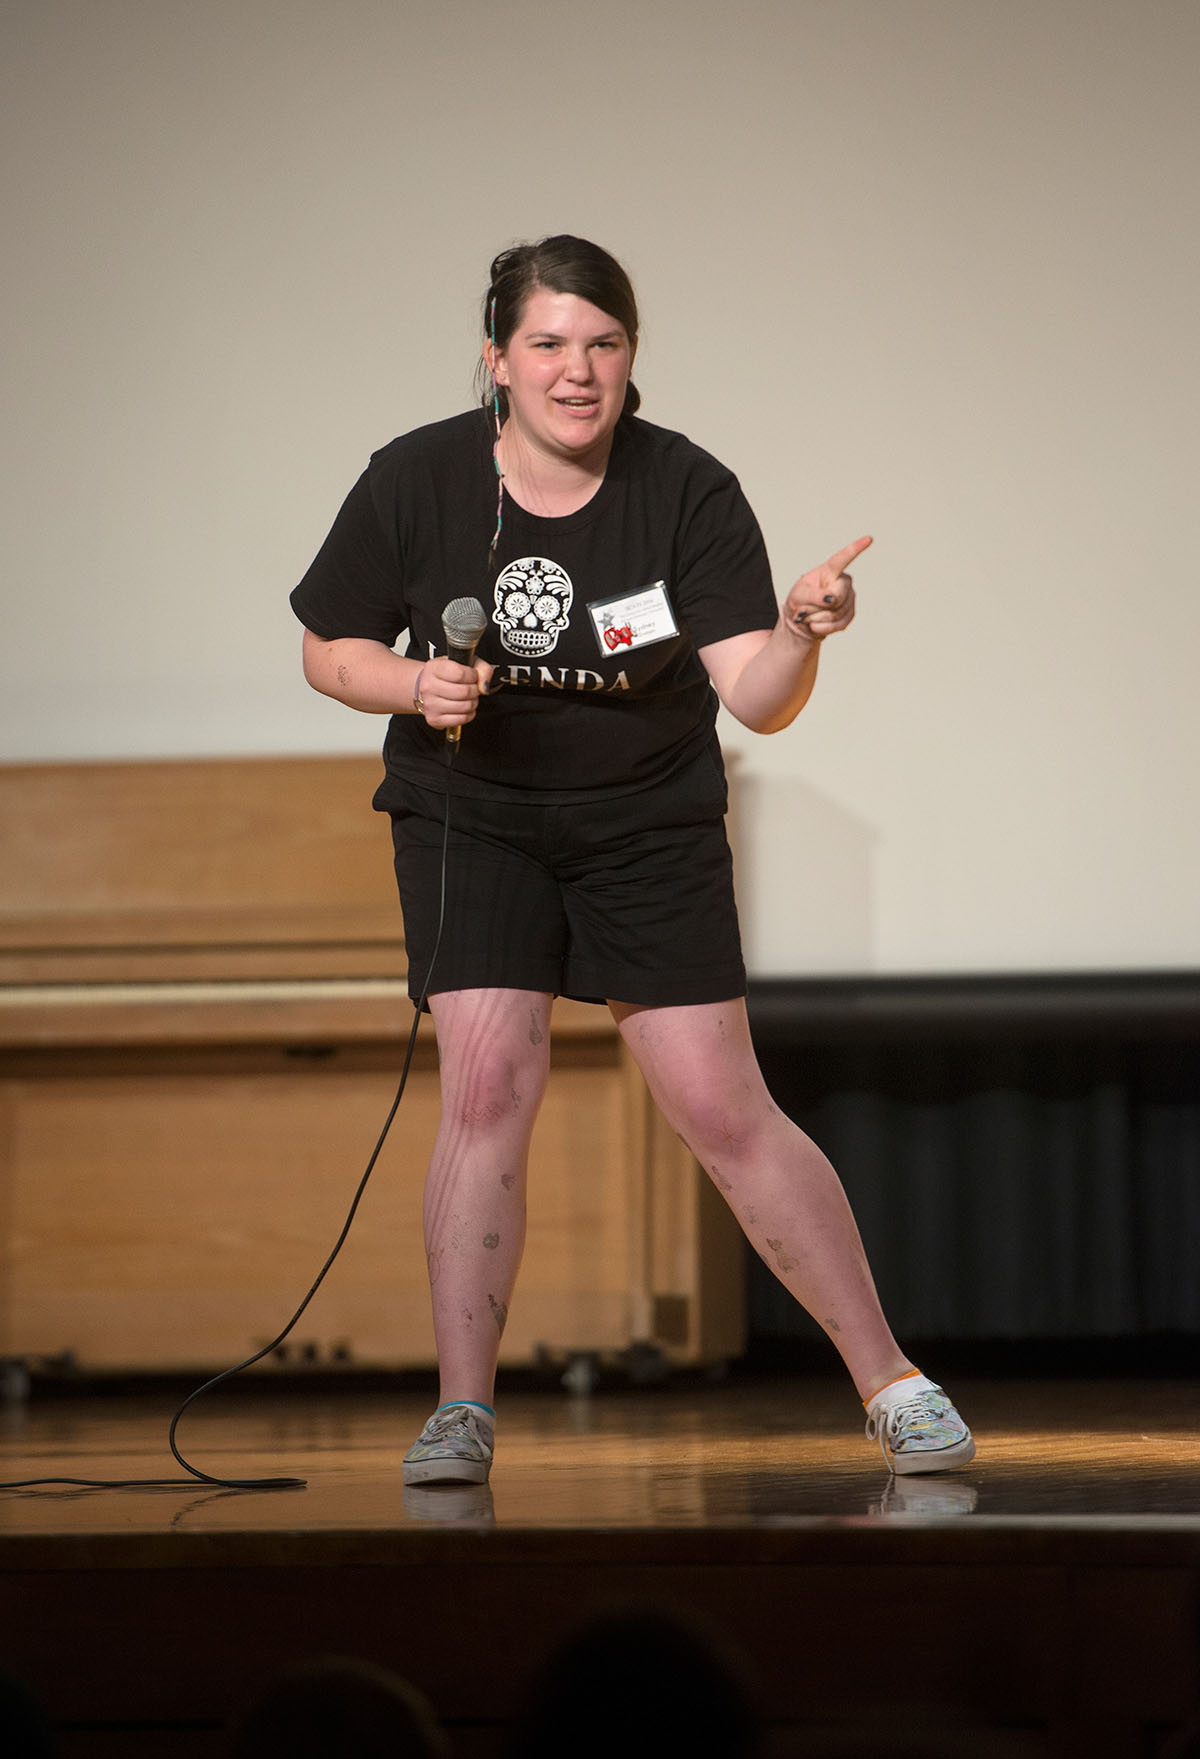 Sydney Graham from Morehead performs "Sideways Stories" from "Wayside School" during theSCATS Talent Show on Wednesday, June 22. (Photo by Tucker Allen Covey)